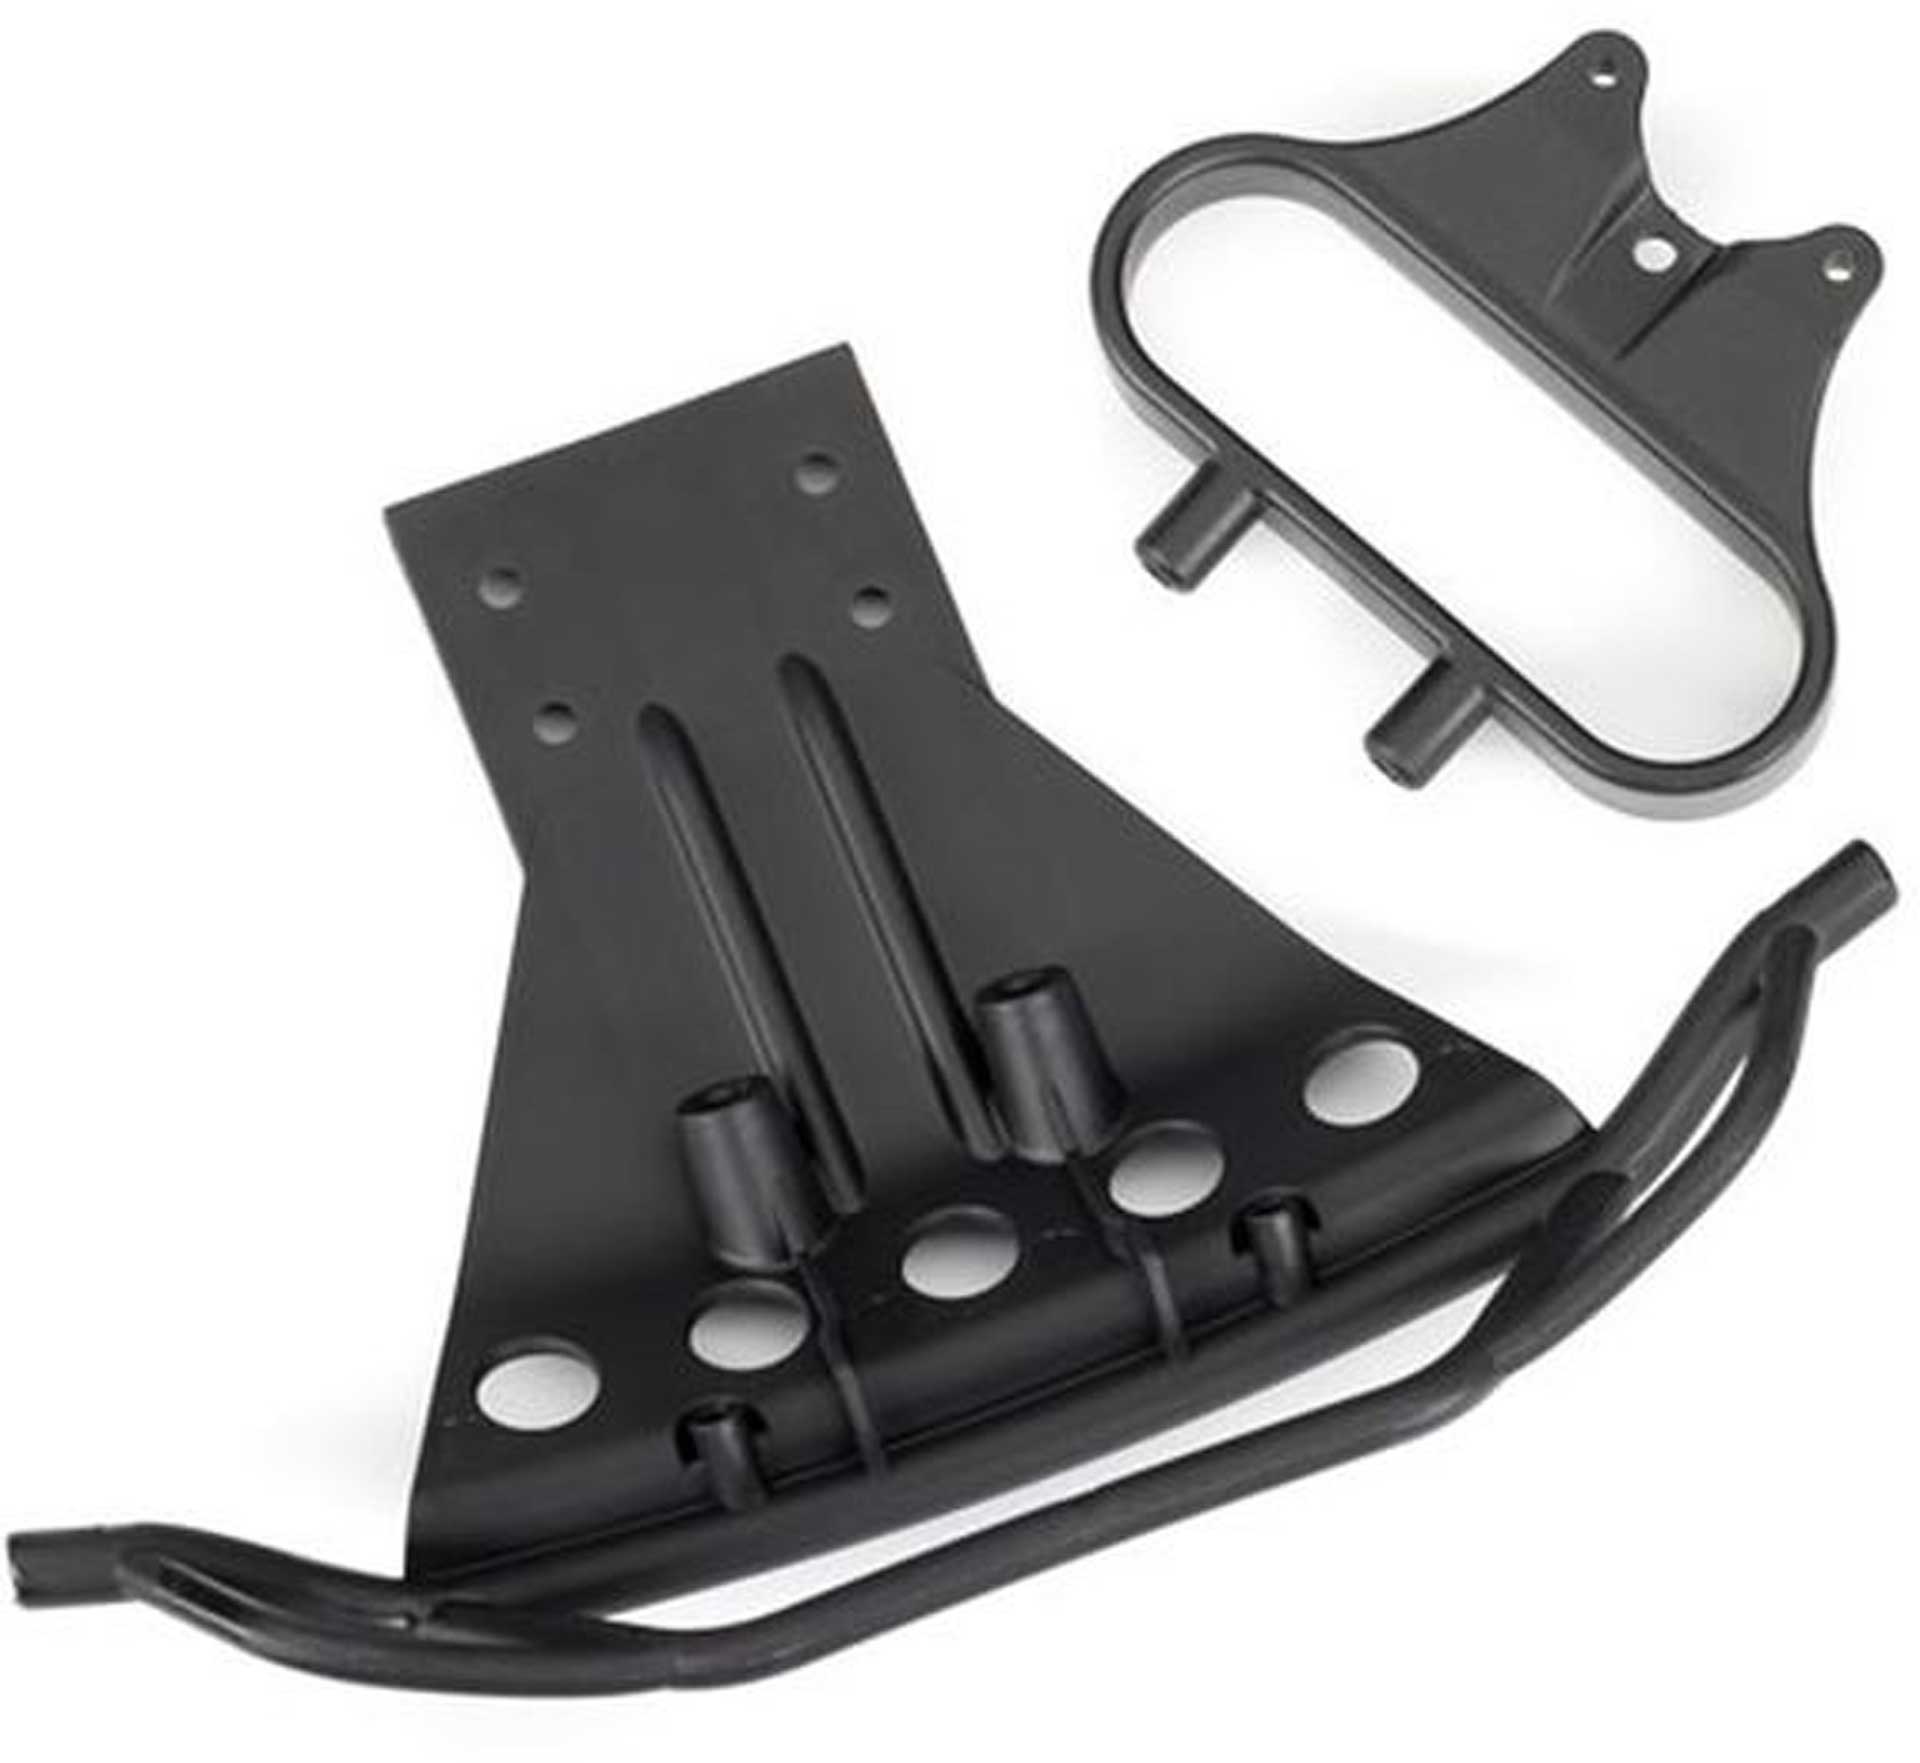 TRAXXAS BUMPER + FRONT HOLDER WITH LED LIGHT MOUNTING FOR 2WD SLASH